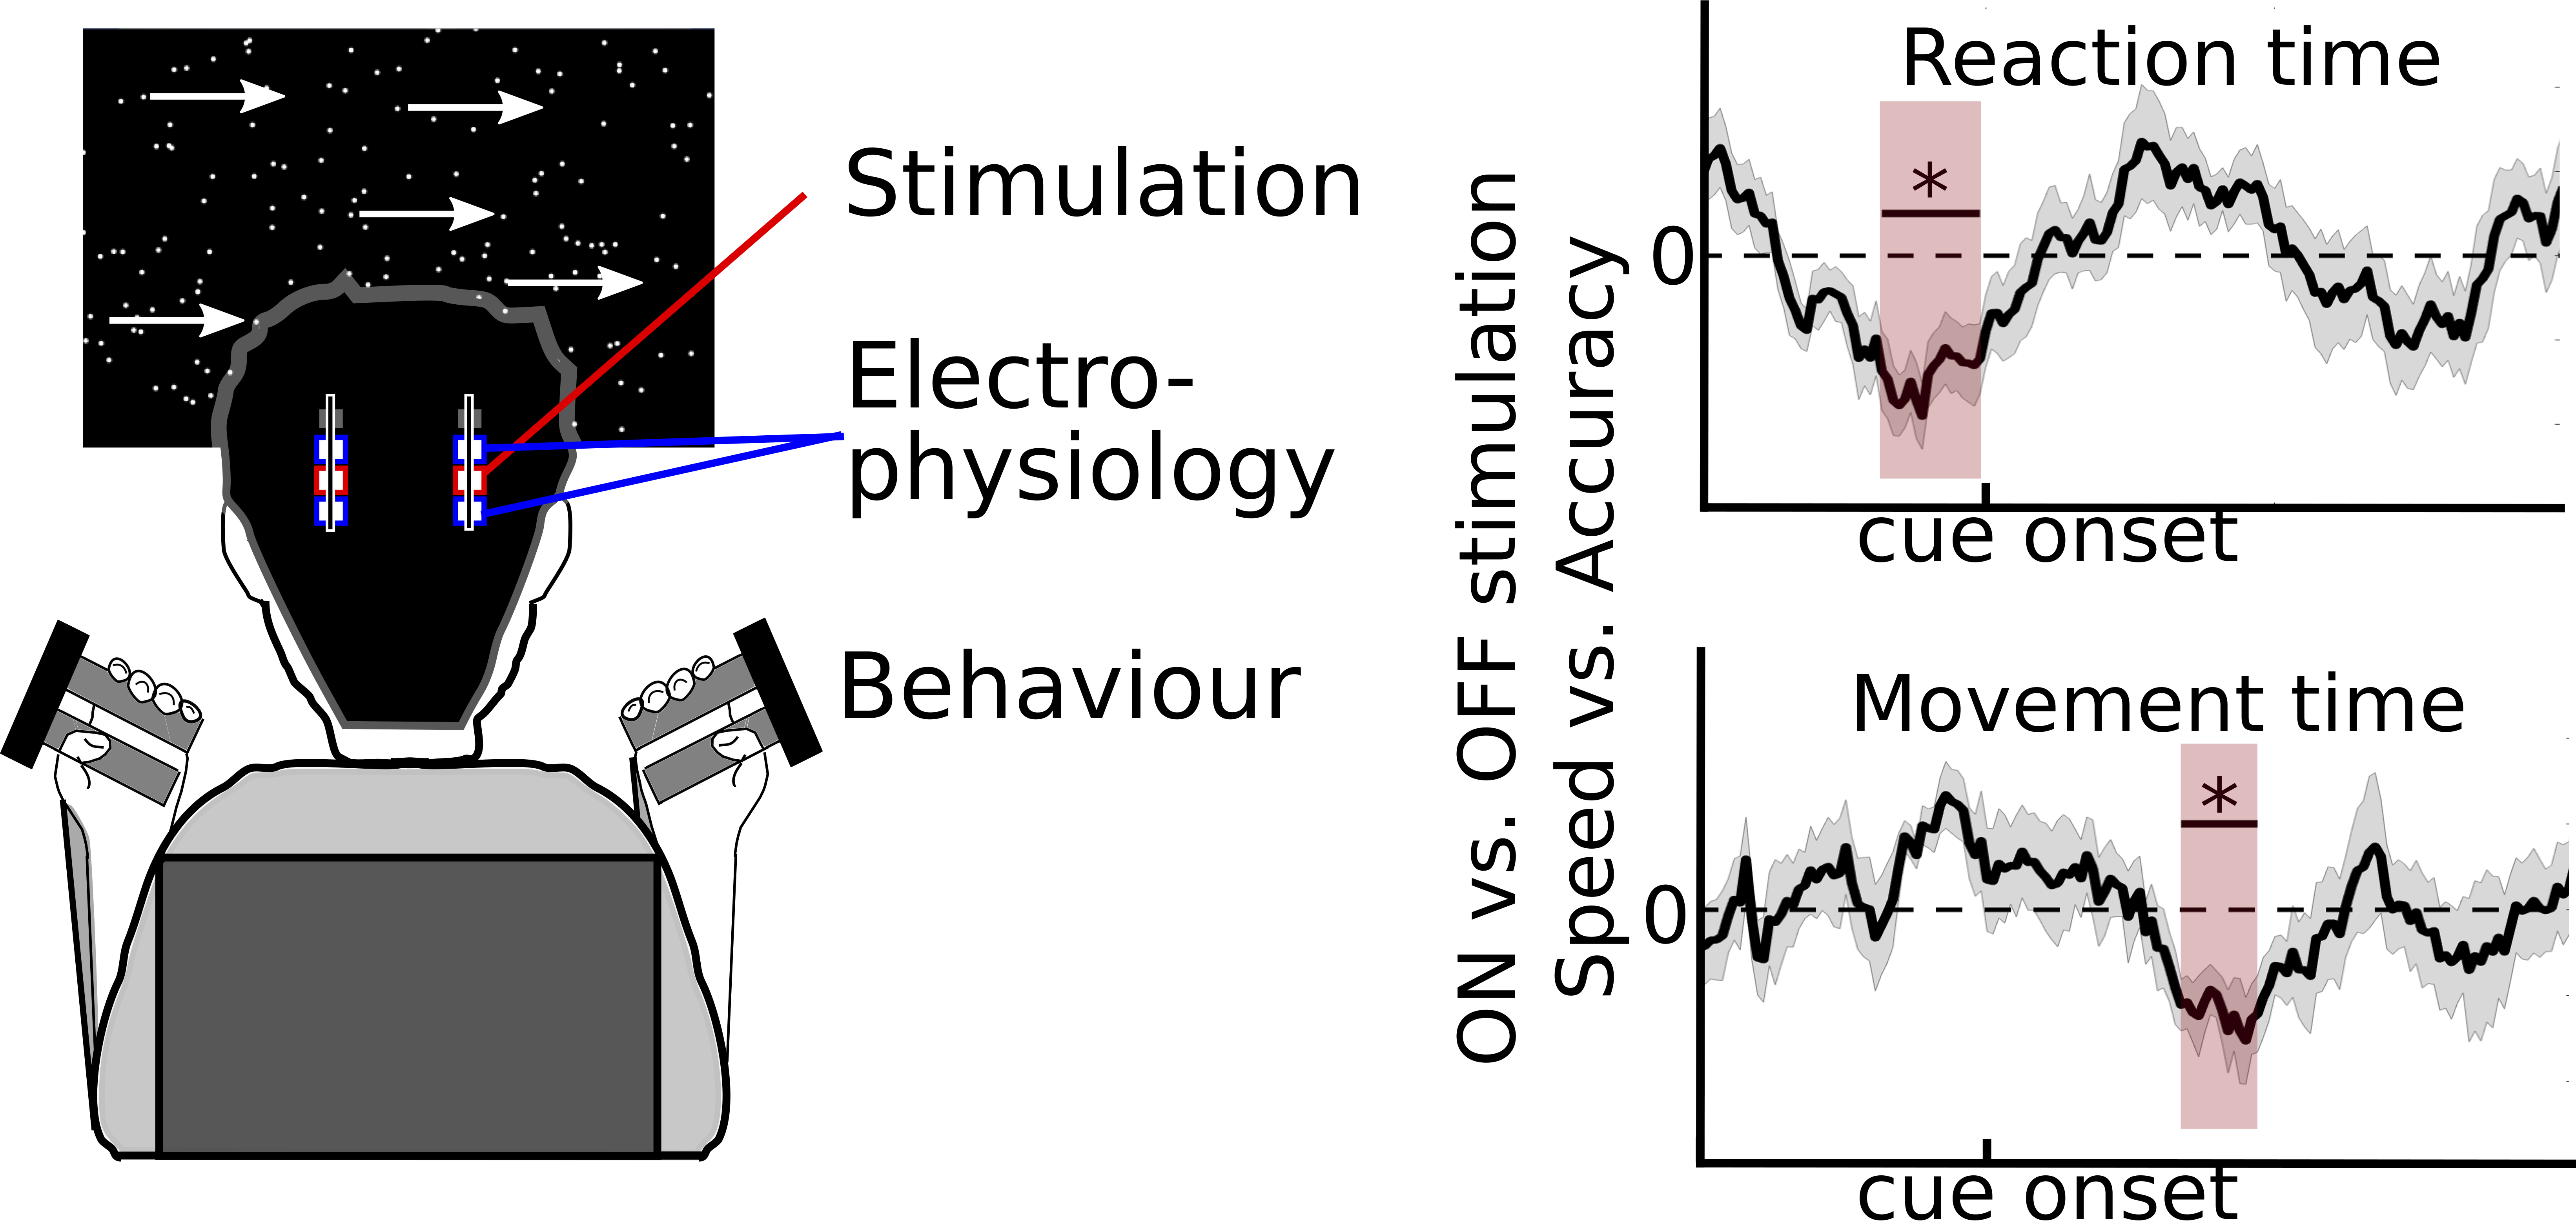 Left, a cartoon of a study participant performing the behavioral task. Right, some sample data from the study.